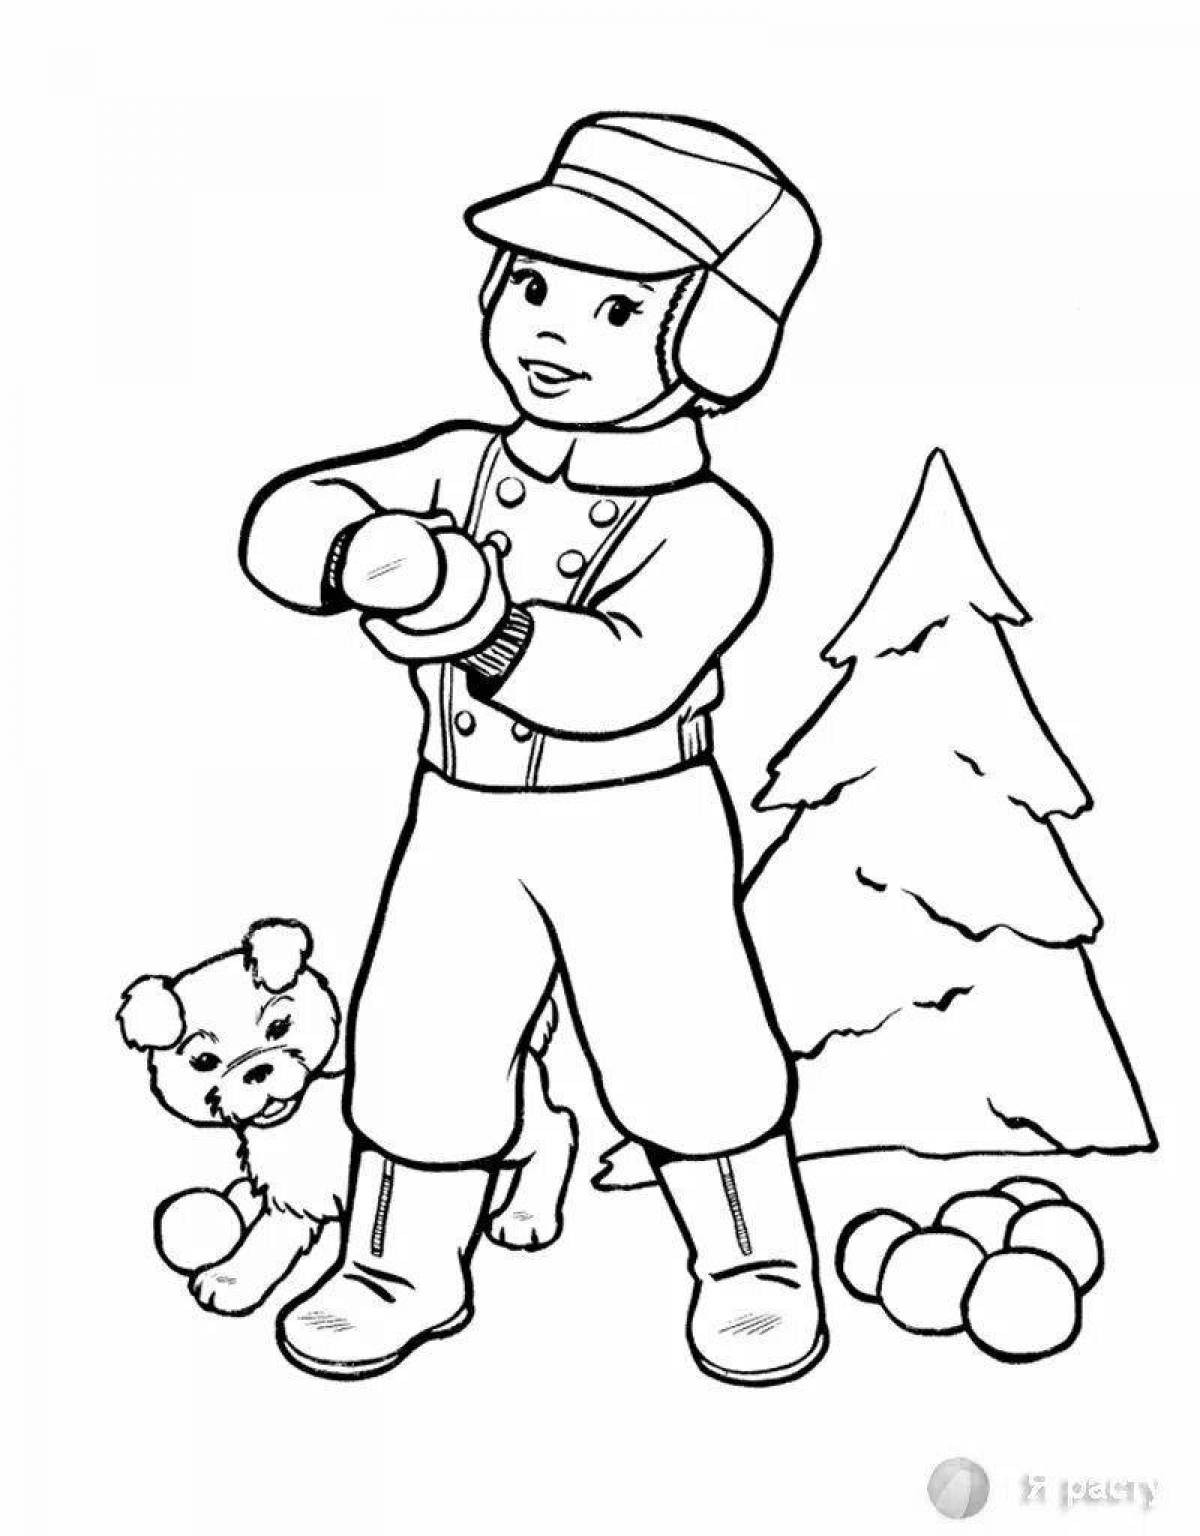 Delightful coloring book boy in winter clothes